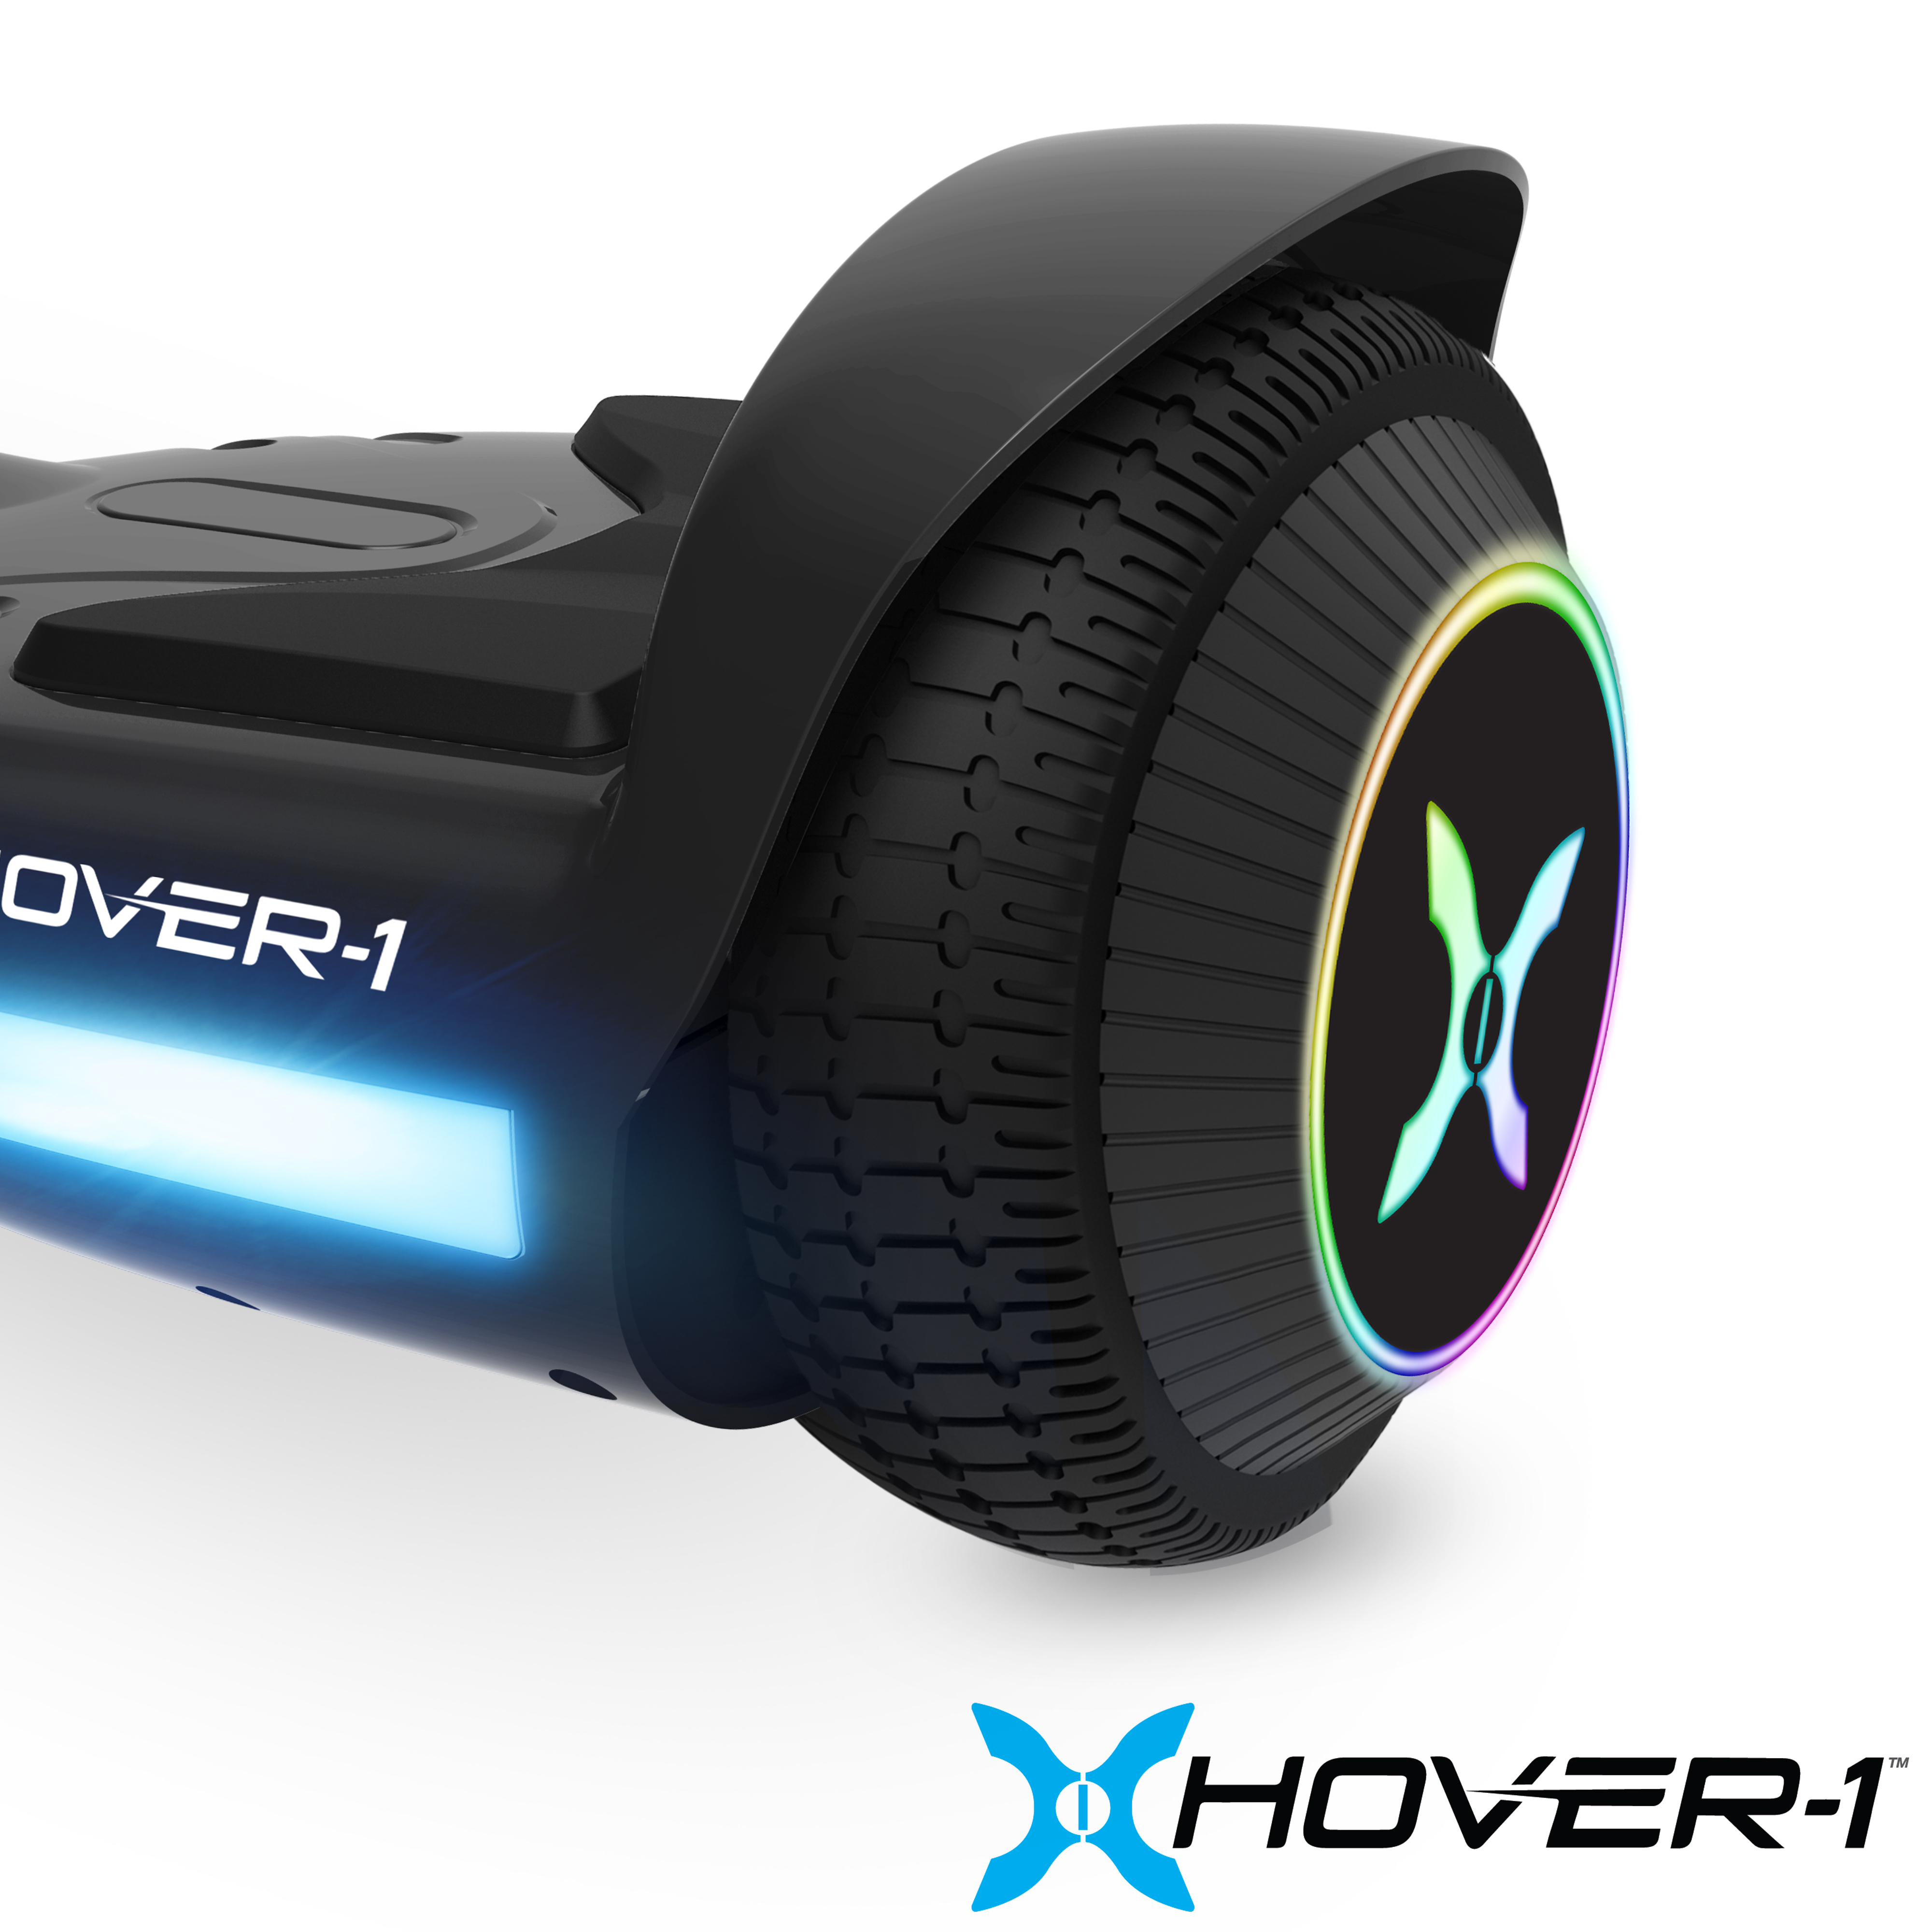 Hover-1 Nova Hoverboard Max Distance 6 Miles - image 6 of 11